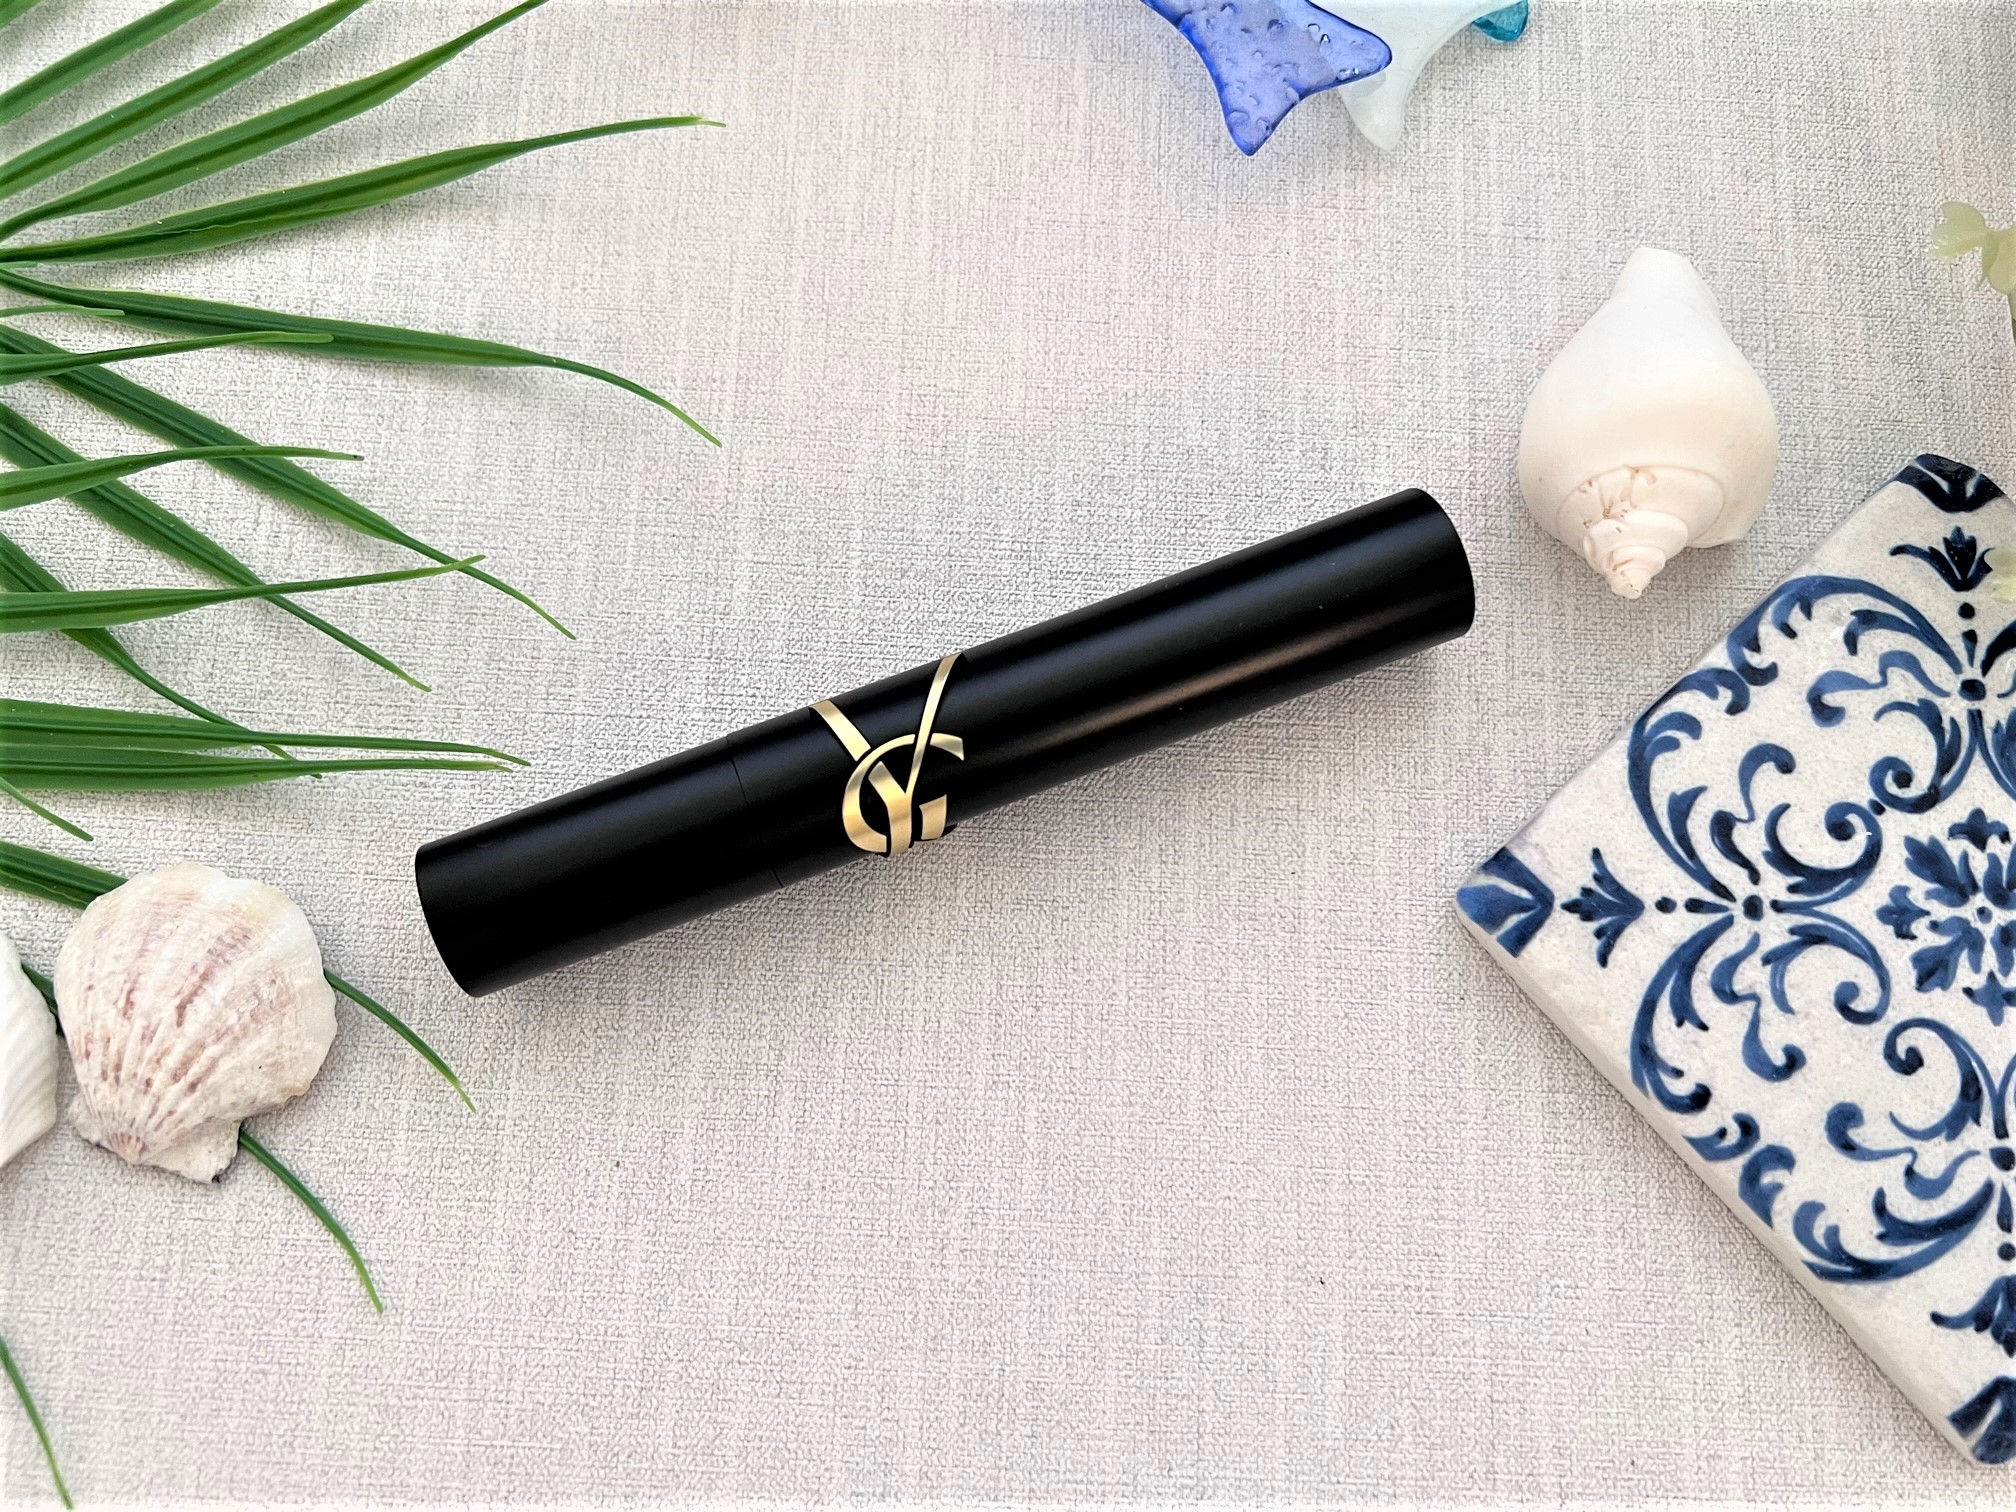 Yves Saint Laurent The Shock Volumizing Mascara: Review and Swatches  The  Happy Sloths: Beauty, Makeup, and Skincare Blog with Reviews and Swatches